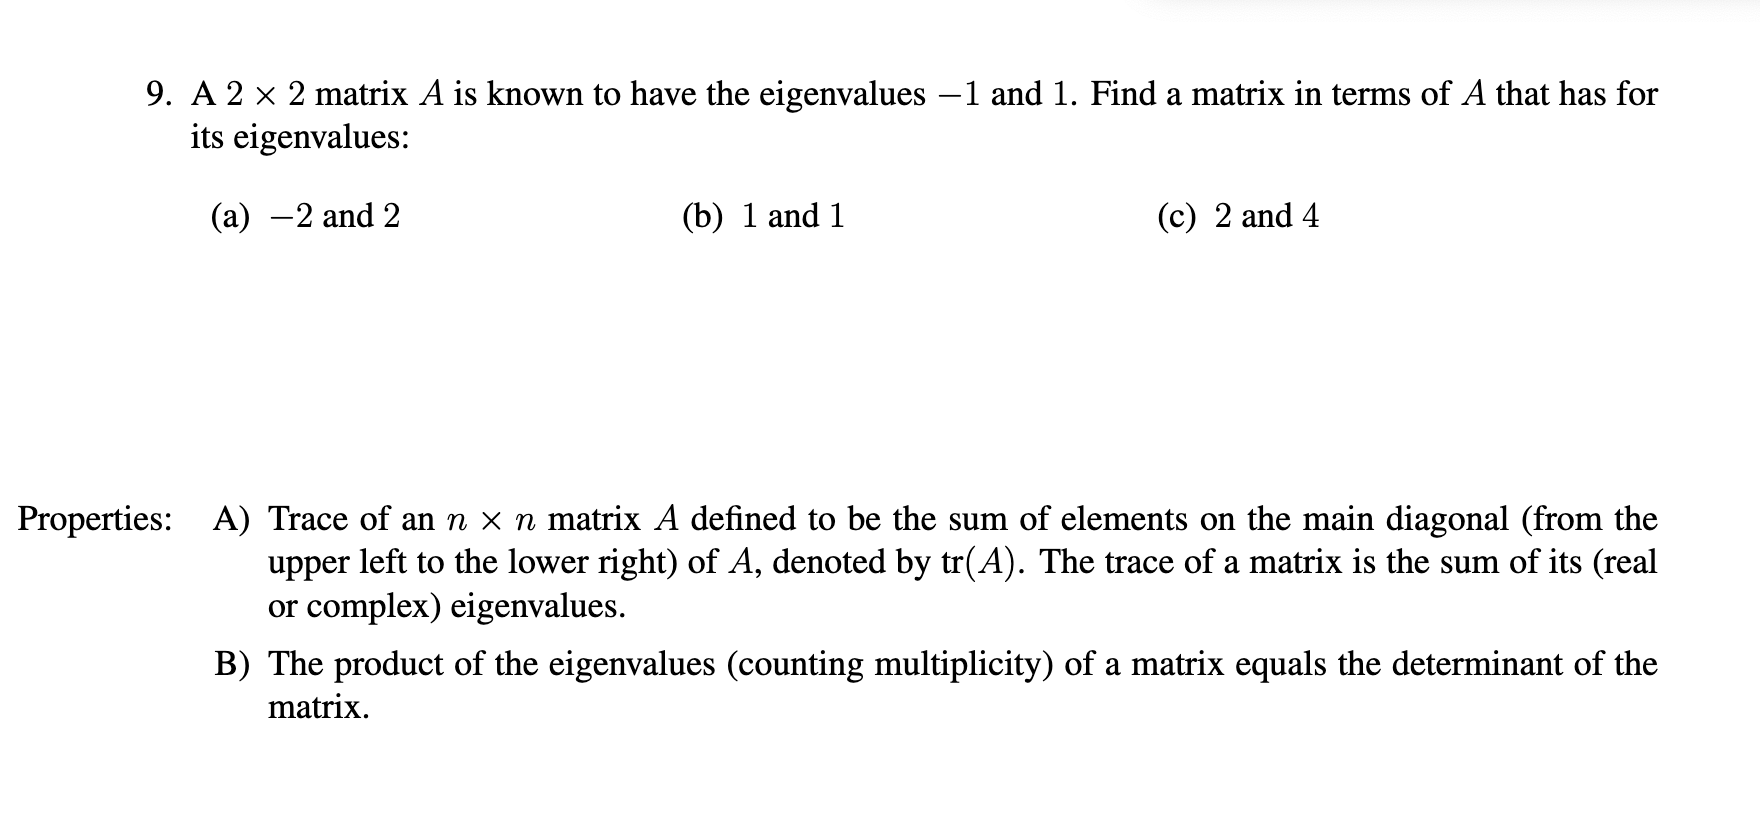 solved-9-a-2-x-2-matrix-a-is-known-to-have-the-eigenvalues-chegg